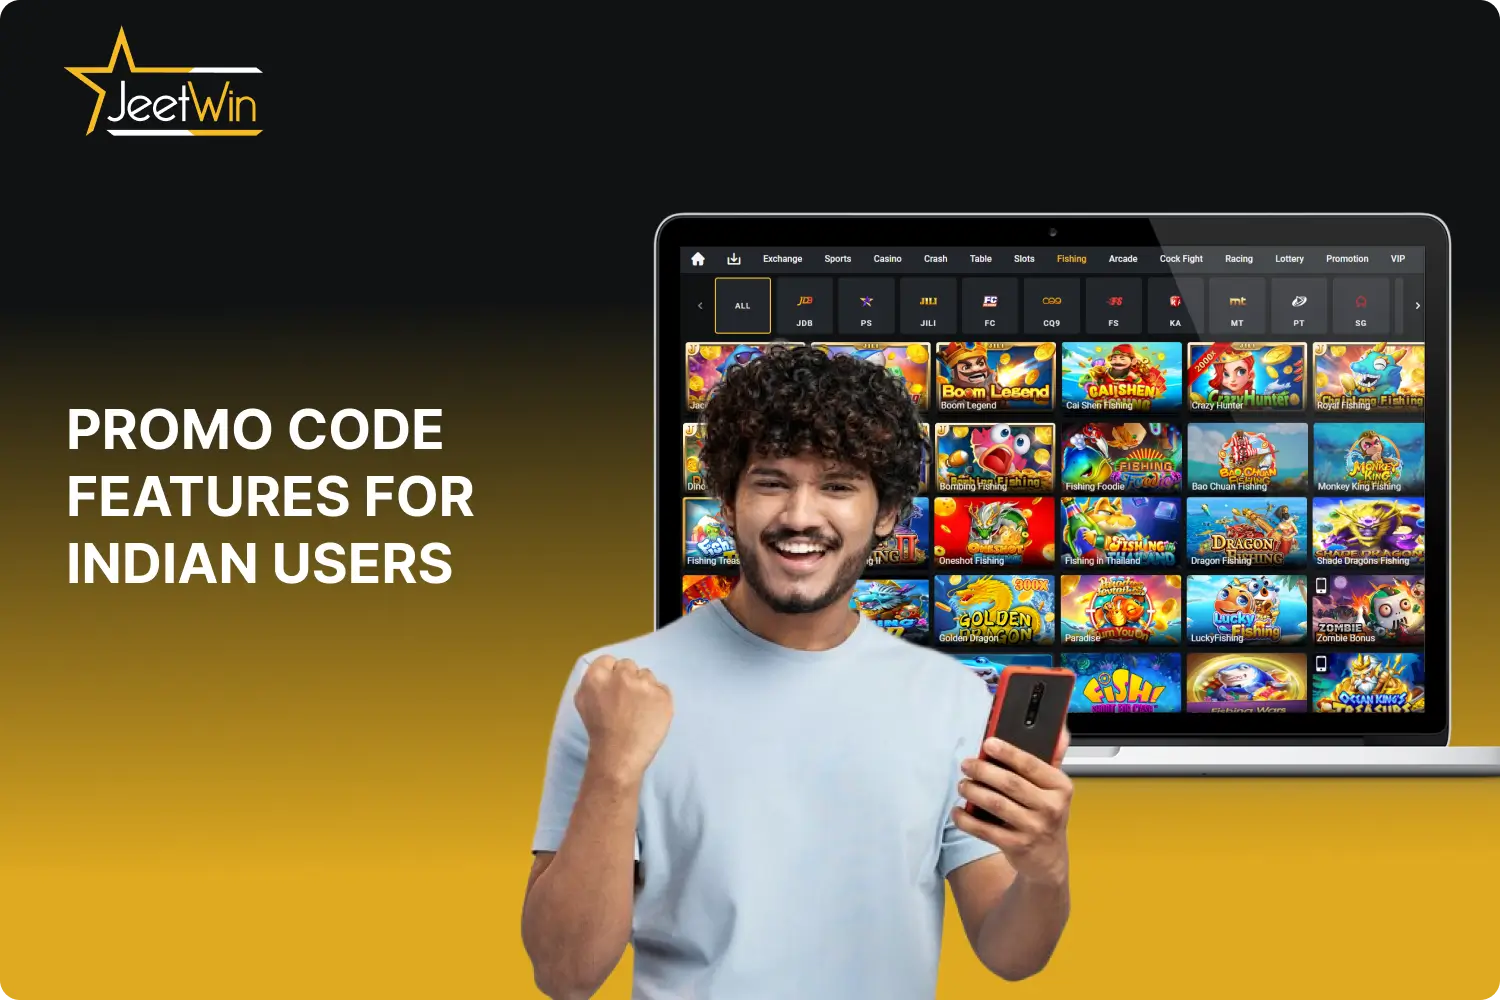 Players from India are eager to use promo codes to improve their gambling experience at Jeetwin